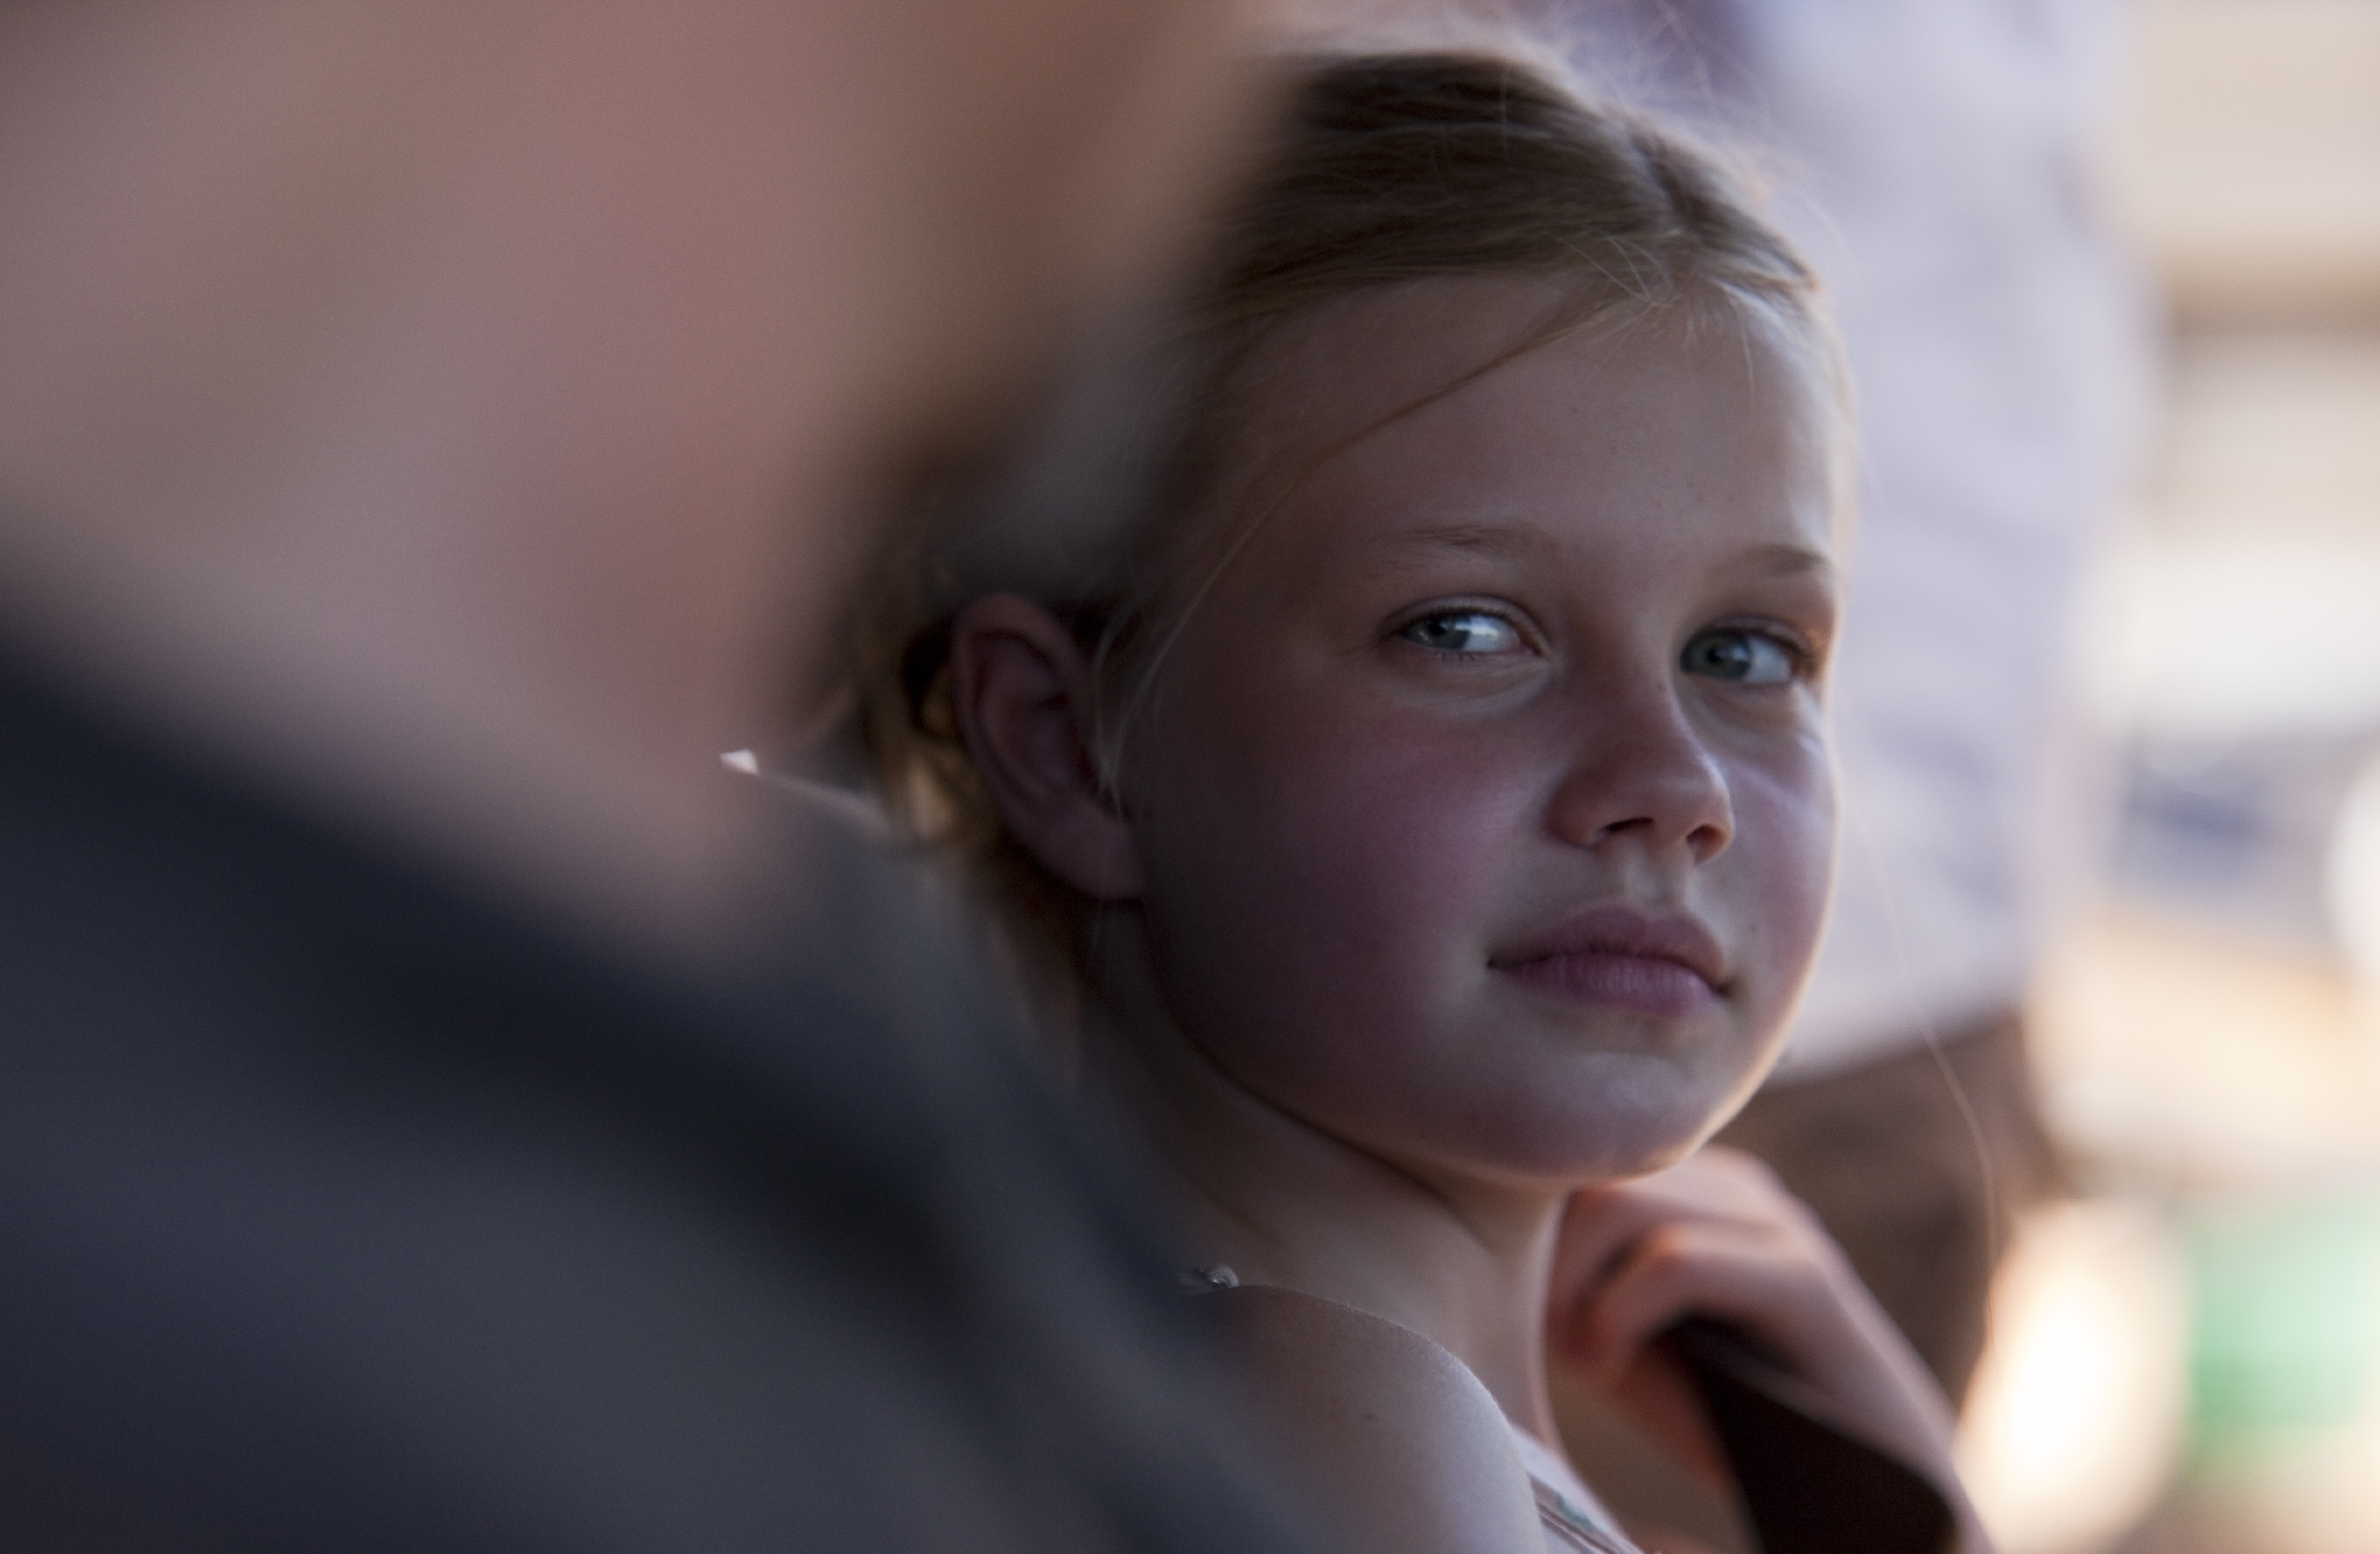 Angourie Rice on location in 'Transmission' (2011), written and directed by Zak Hilditch, produced by Liz Kearney.